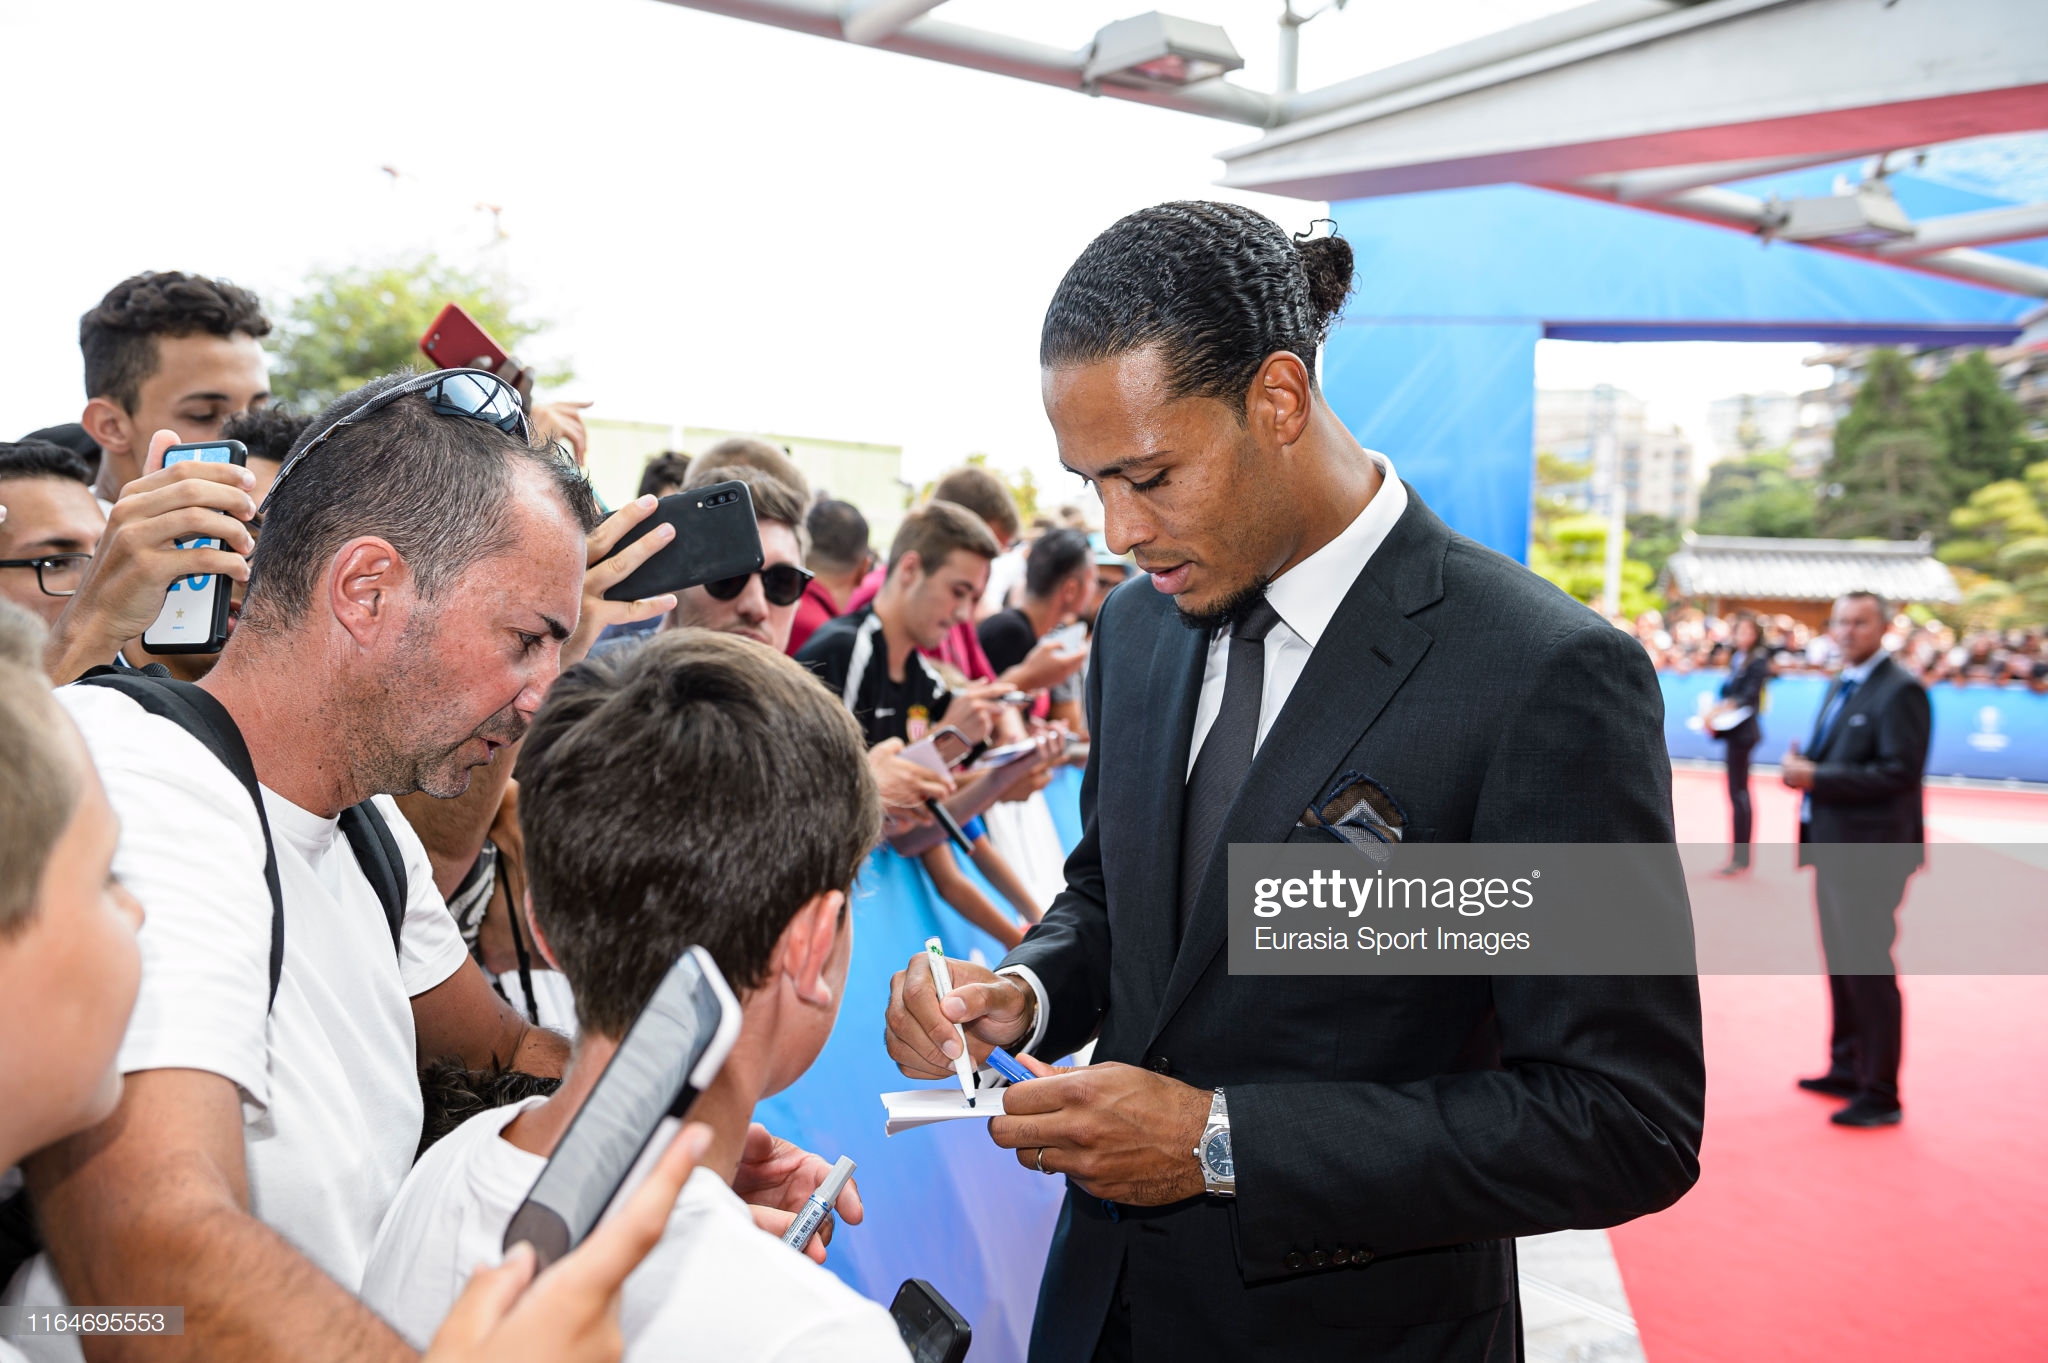 gettyimages-1164695553-2048x2048.jpg